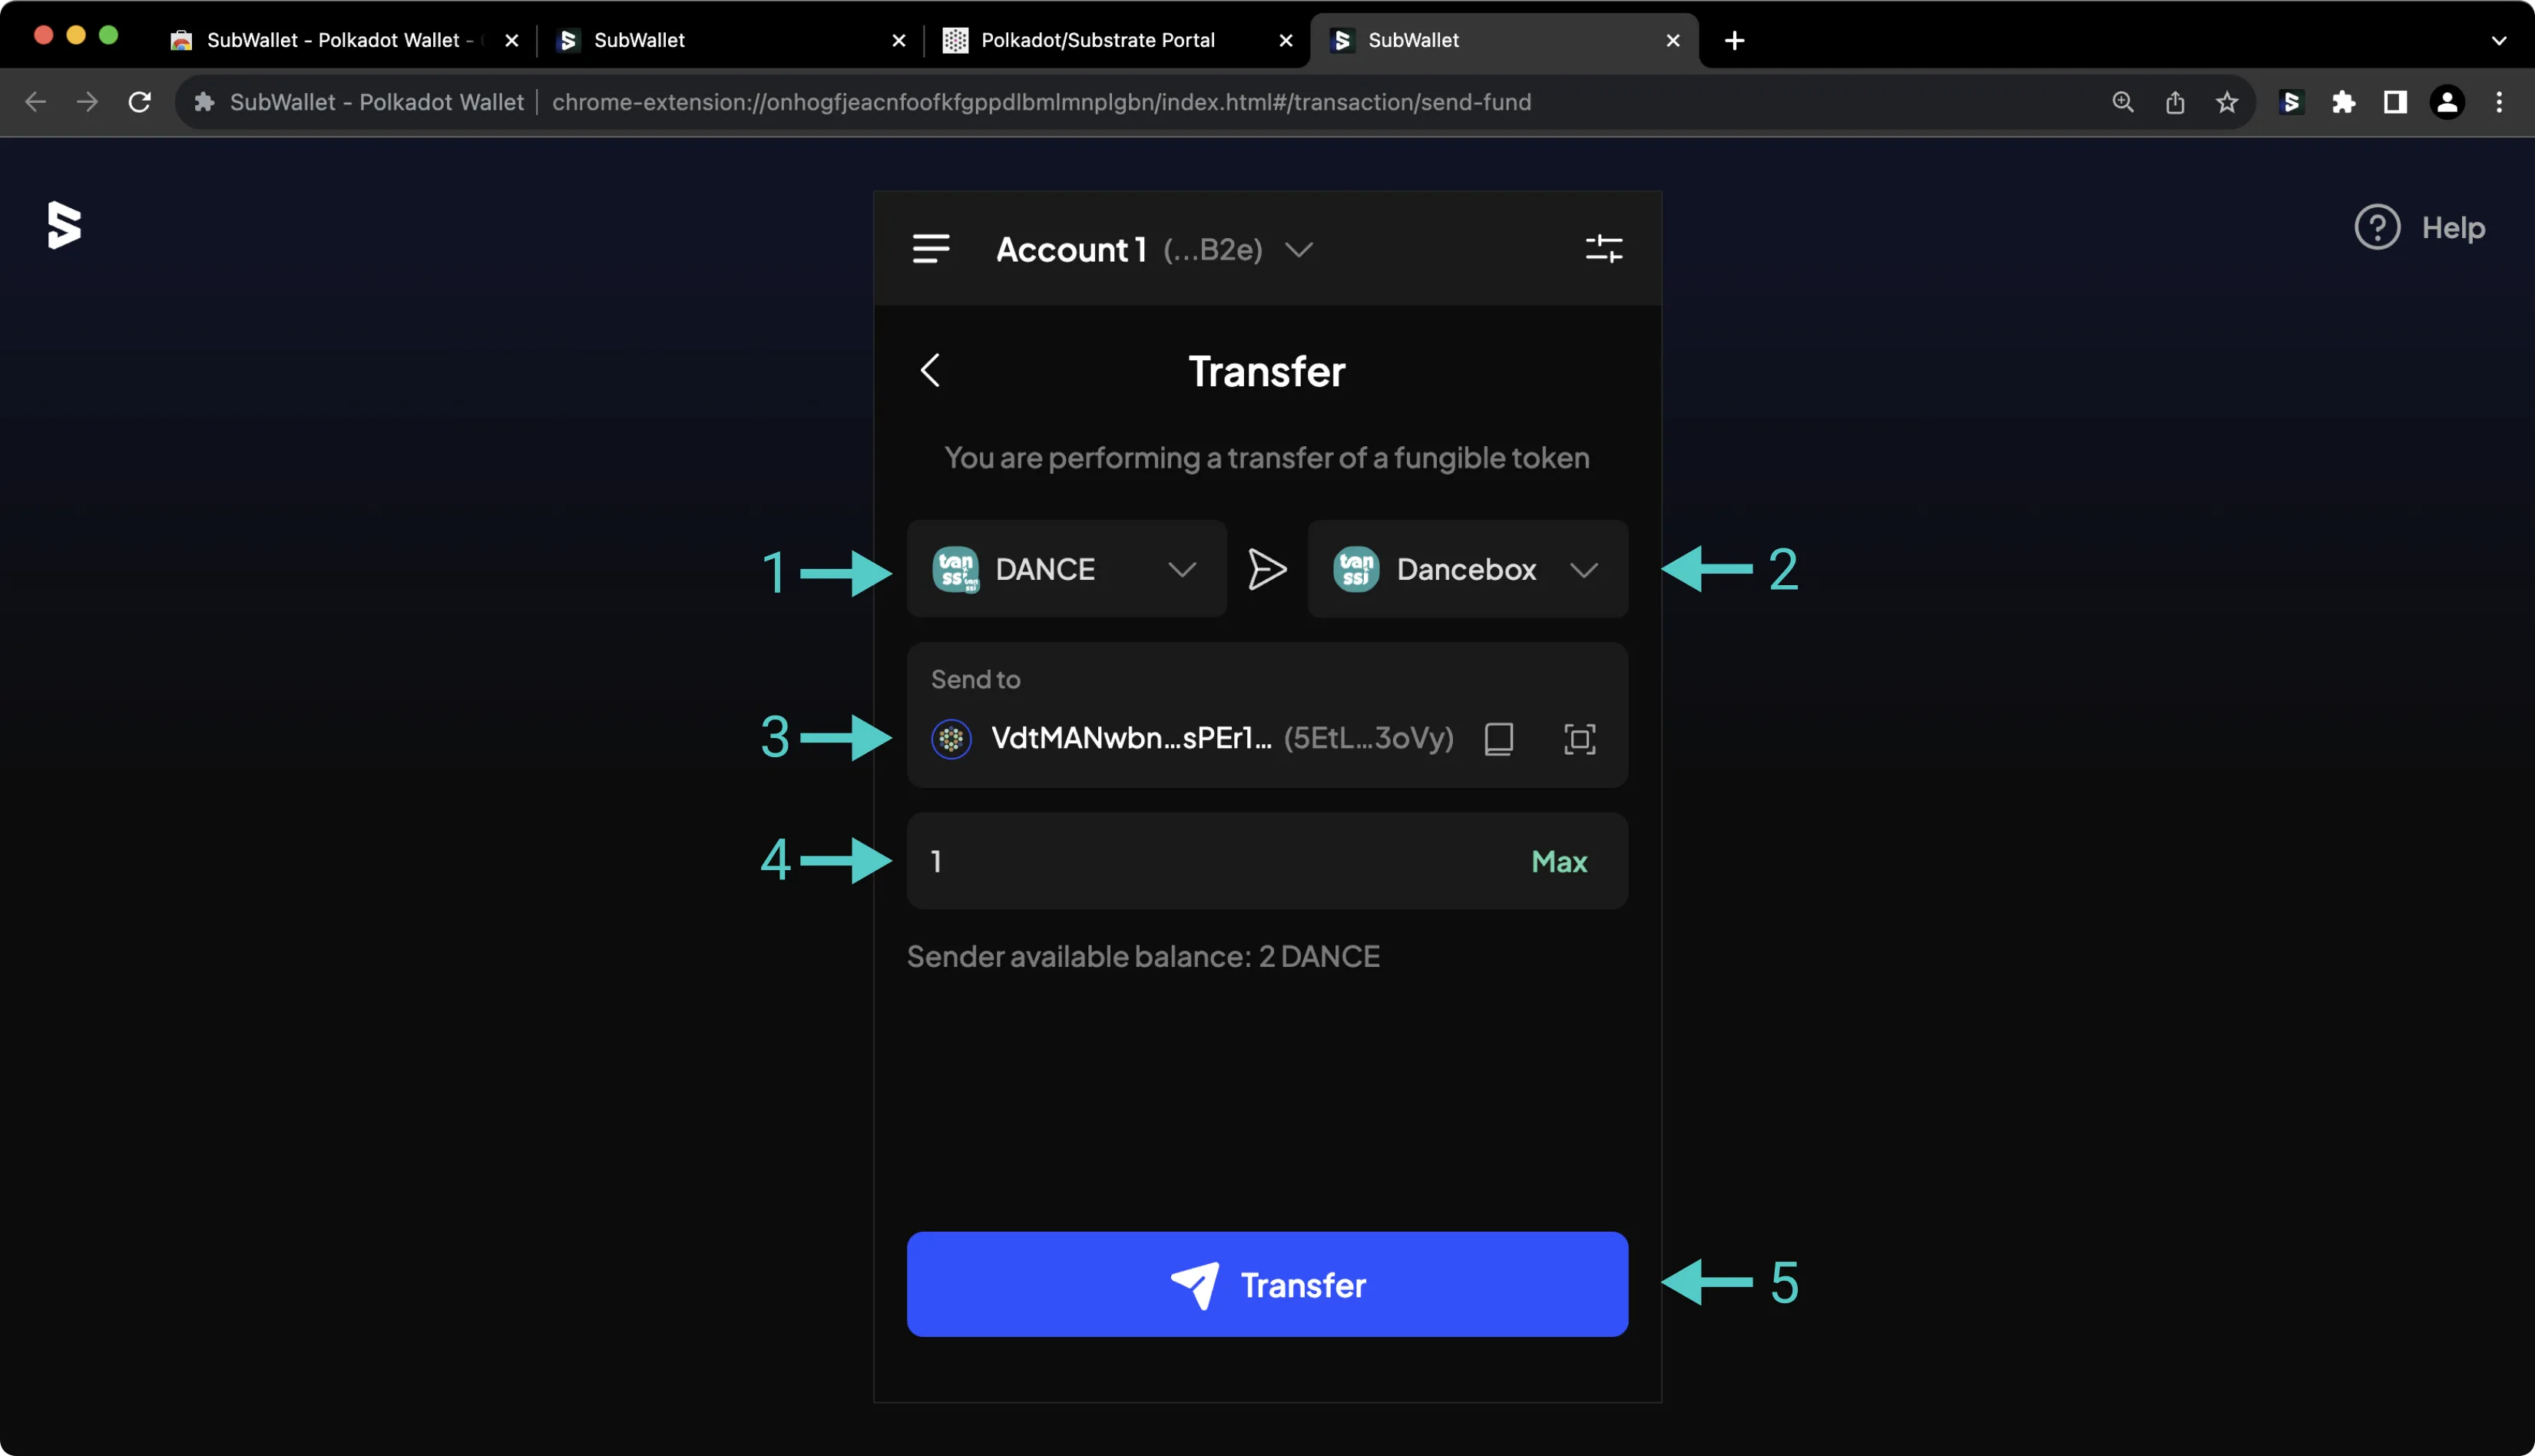 Send funds through Substrate API directly in SubWallet